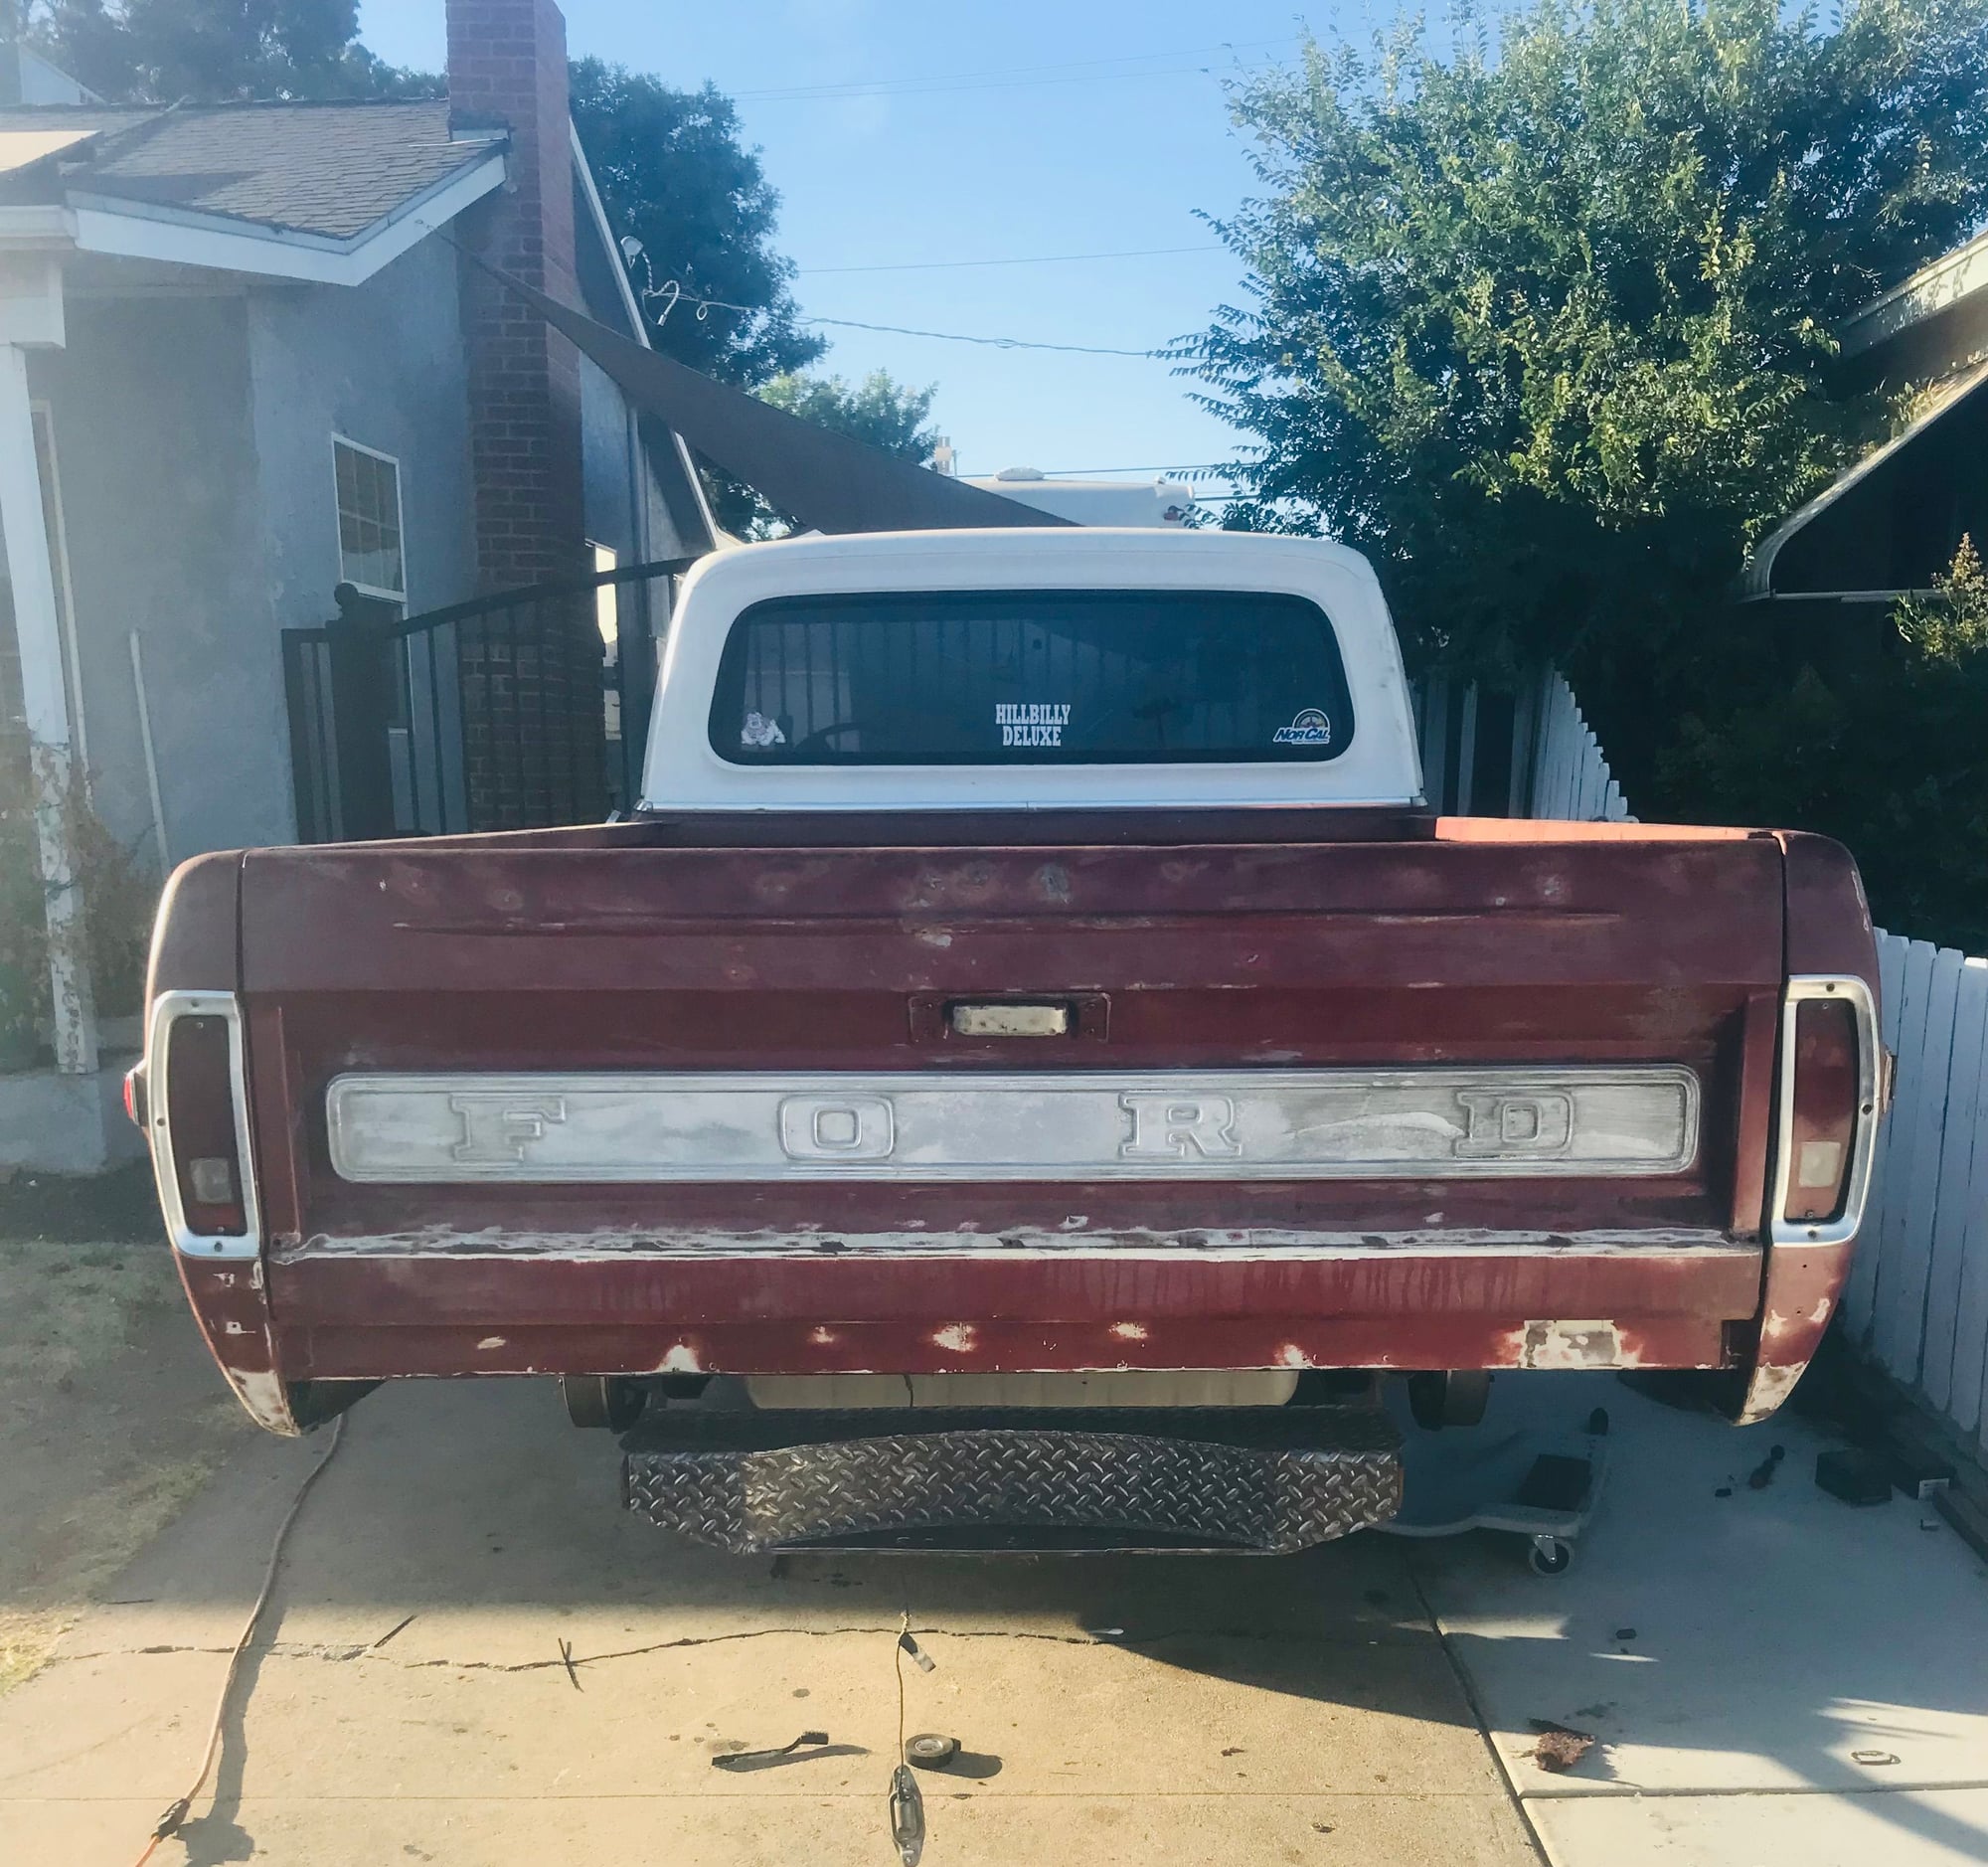 1971 Ford F-100 - f100 parts complete project sell or trade - Used - Fresno, CA 93703, United States